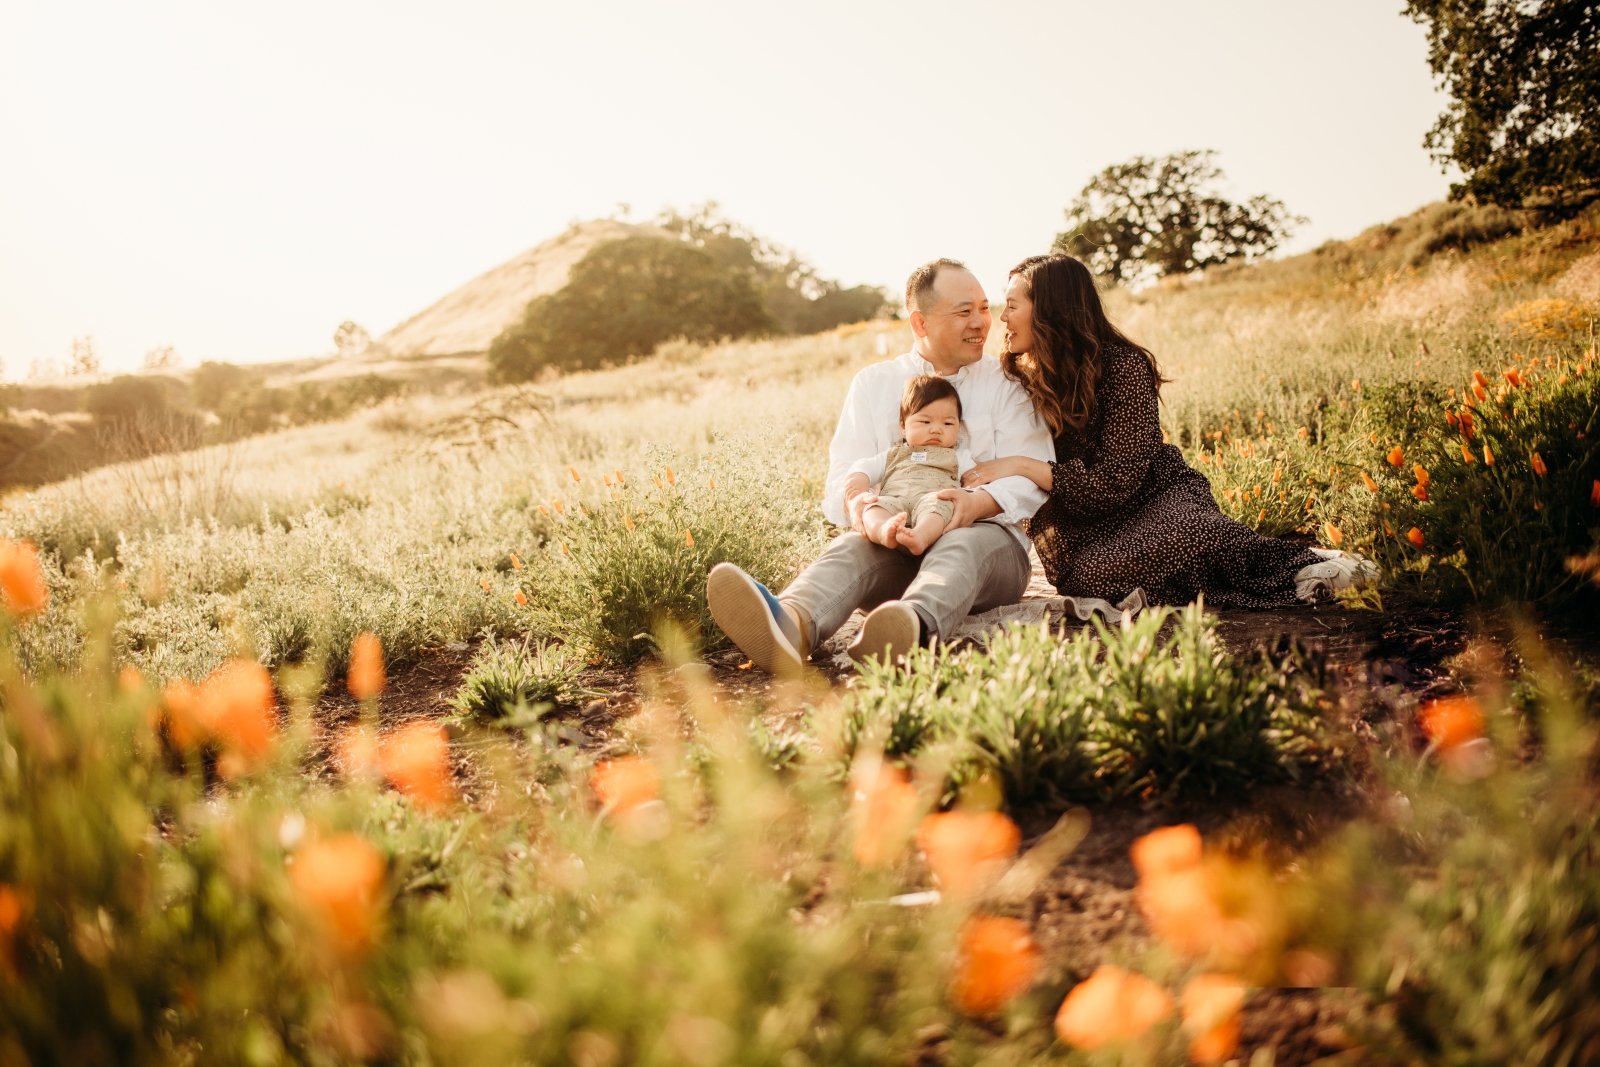 EAST BAY AREA FAMILY PHOTOGRAPHY SHELL RIDGE OPEN SPACE BABY LIFESTYLE PHOTOSHOOT  25.jpg